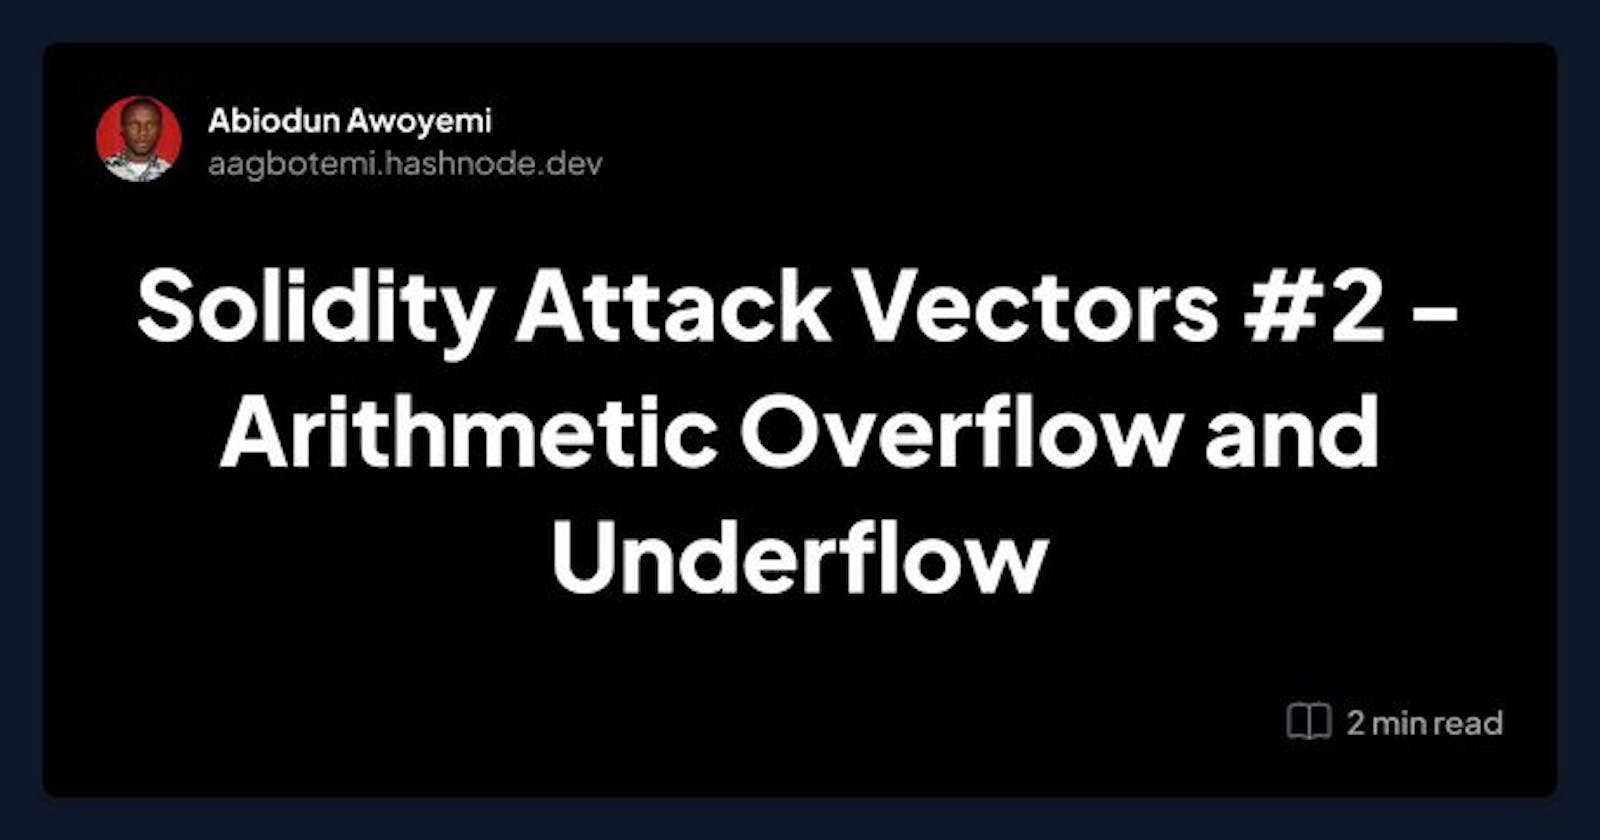 Solidity Attack Vectors #2 - Arithmetic Overflow and Underflow